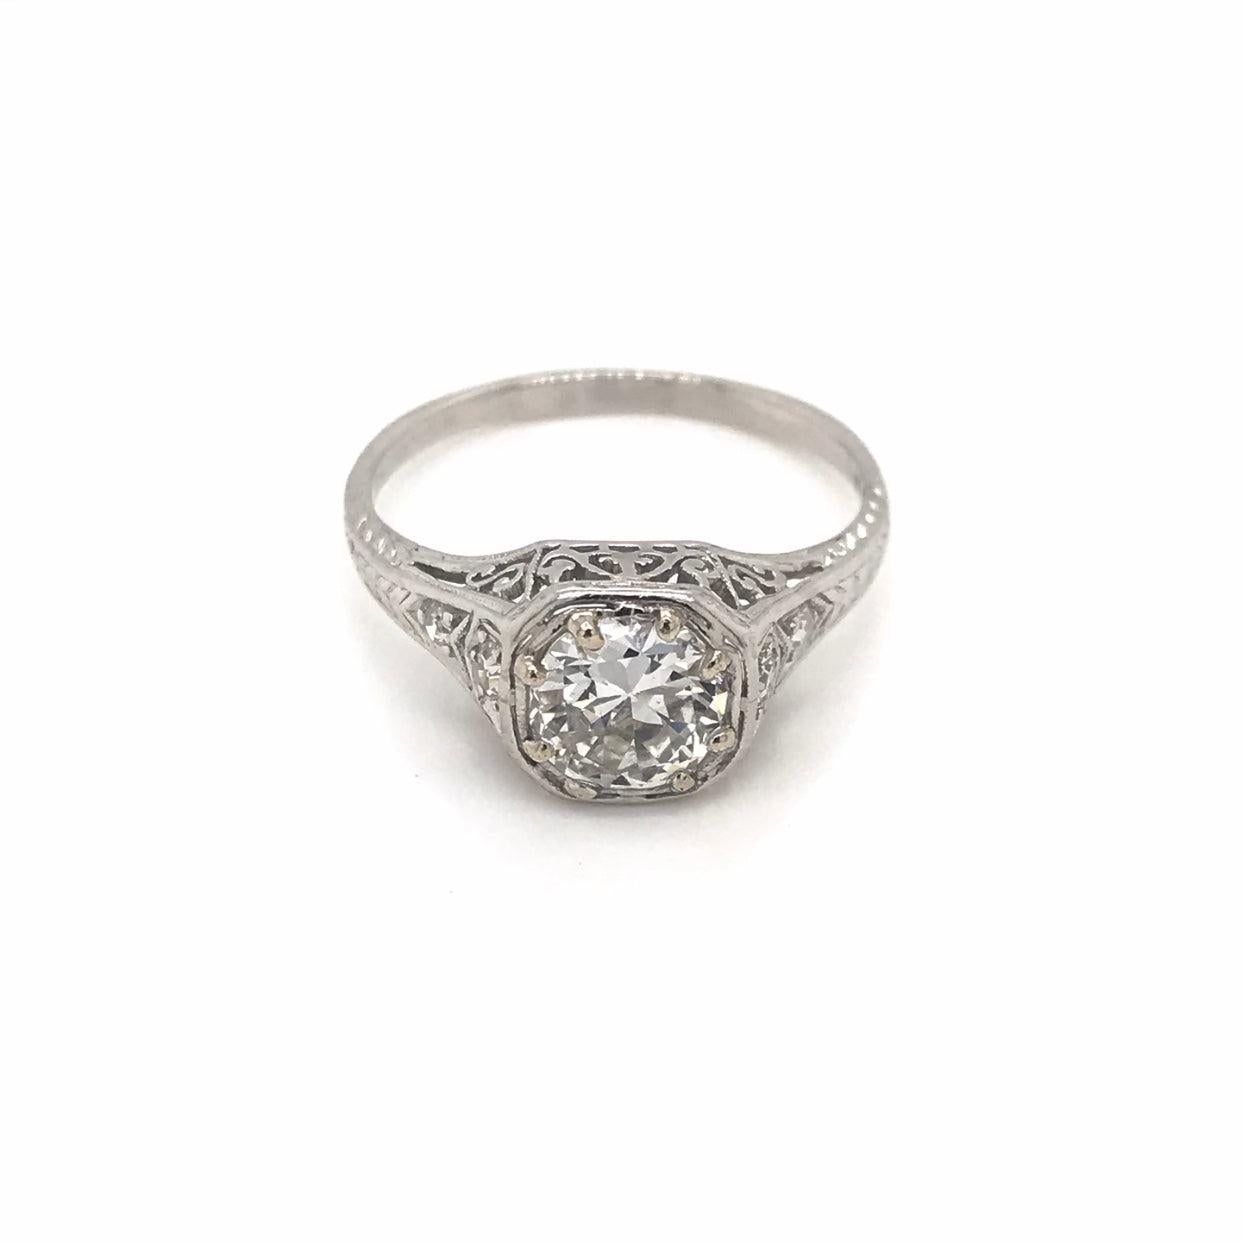 This beautiful antique piece was handcrafted in the early twentieth century. This Edwardian ring features a gorgeous 0.90 carat diamond in the center. The center diamond grades approximately an I in color and VS2 in clarity. The setting is platinum